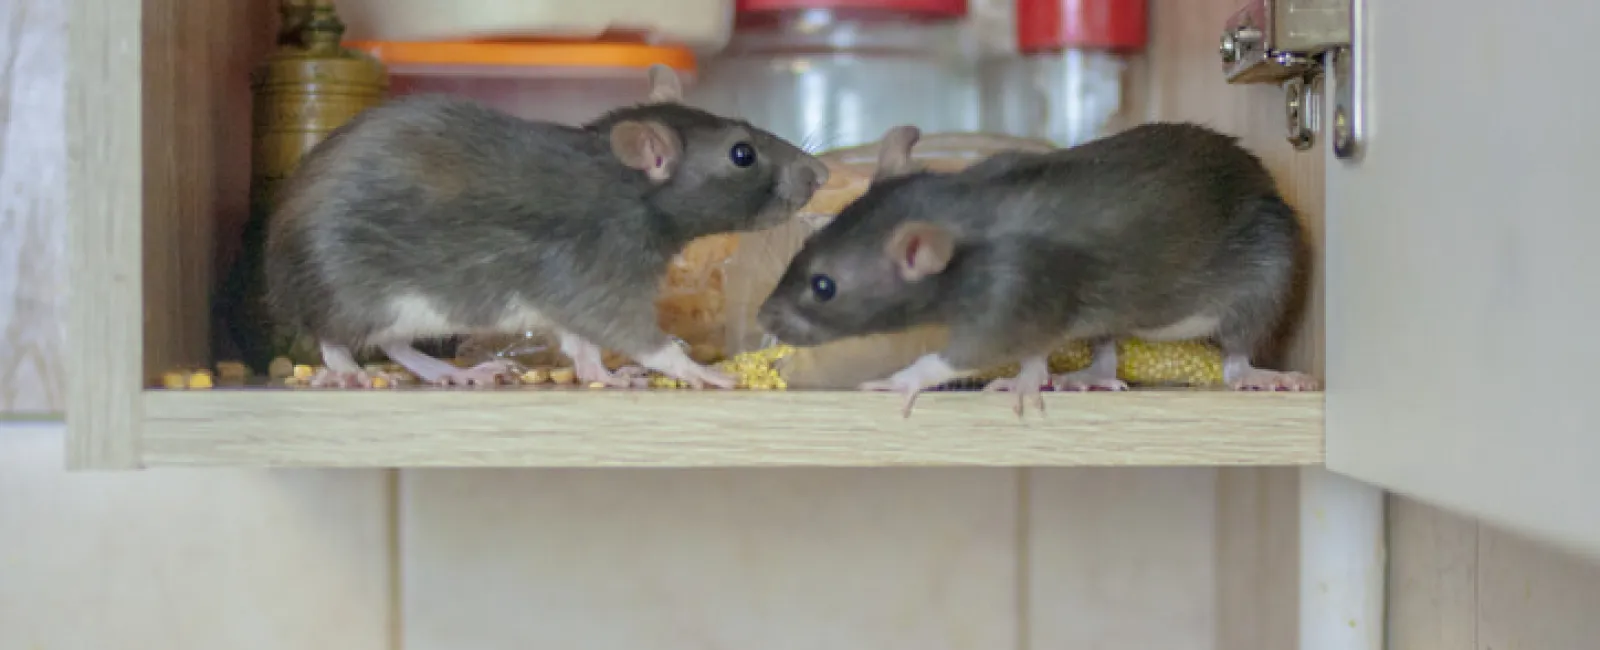 a group of rodents on a shelf